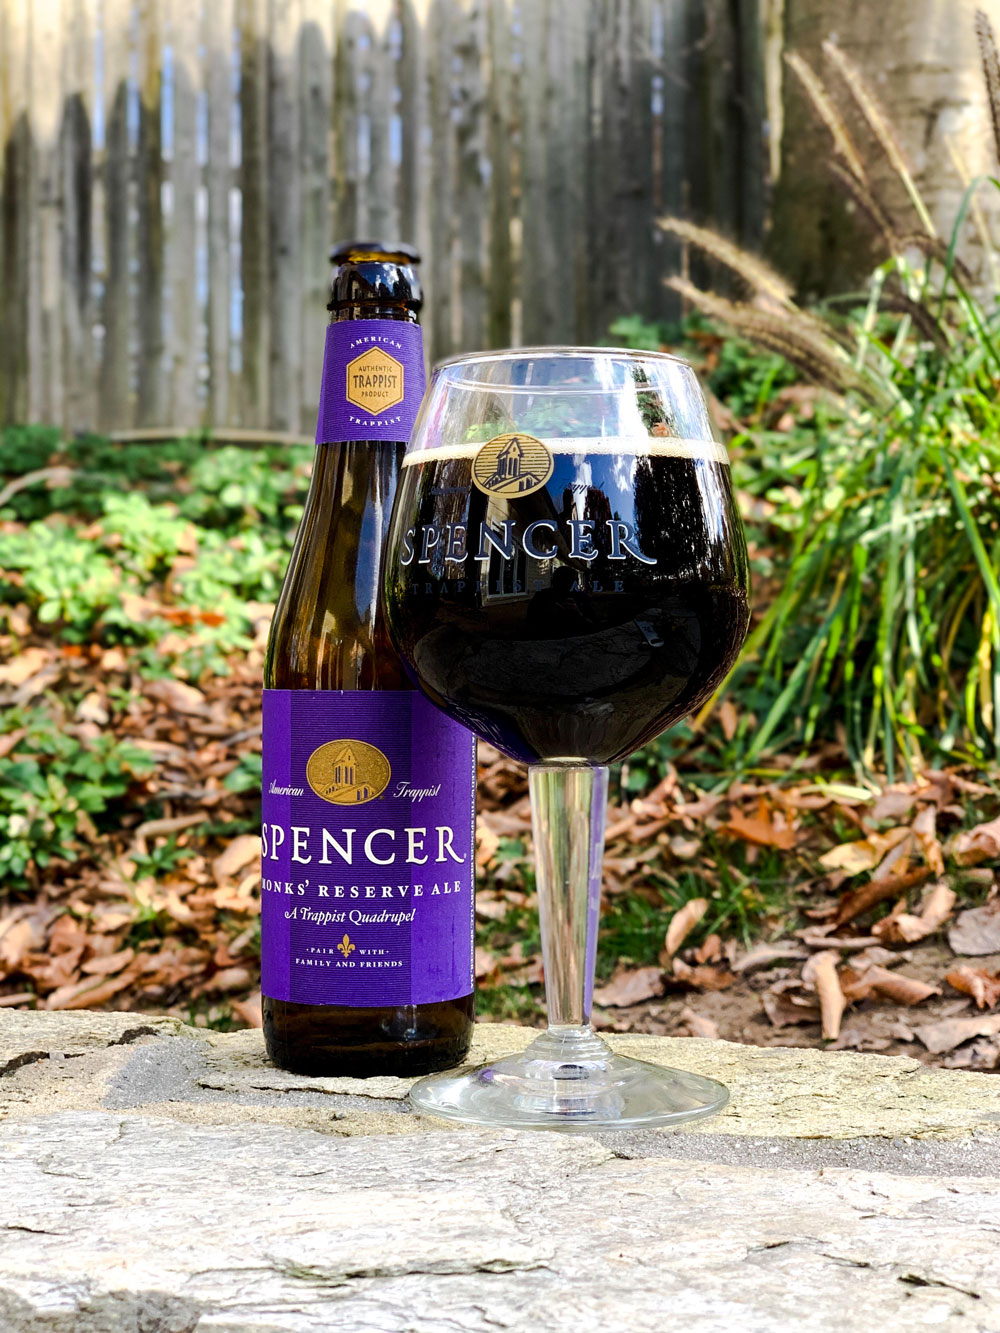 Spencer Monks' Reserve Ale with Chalice